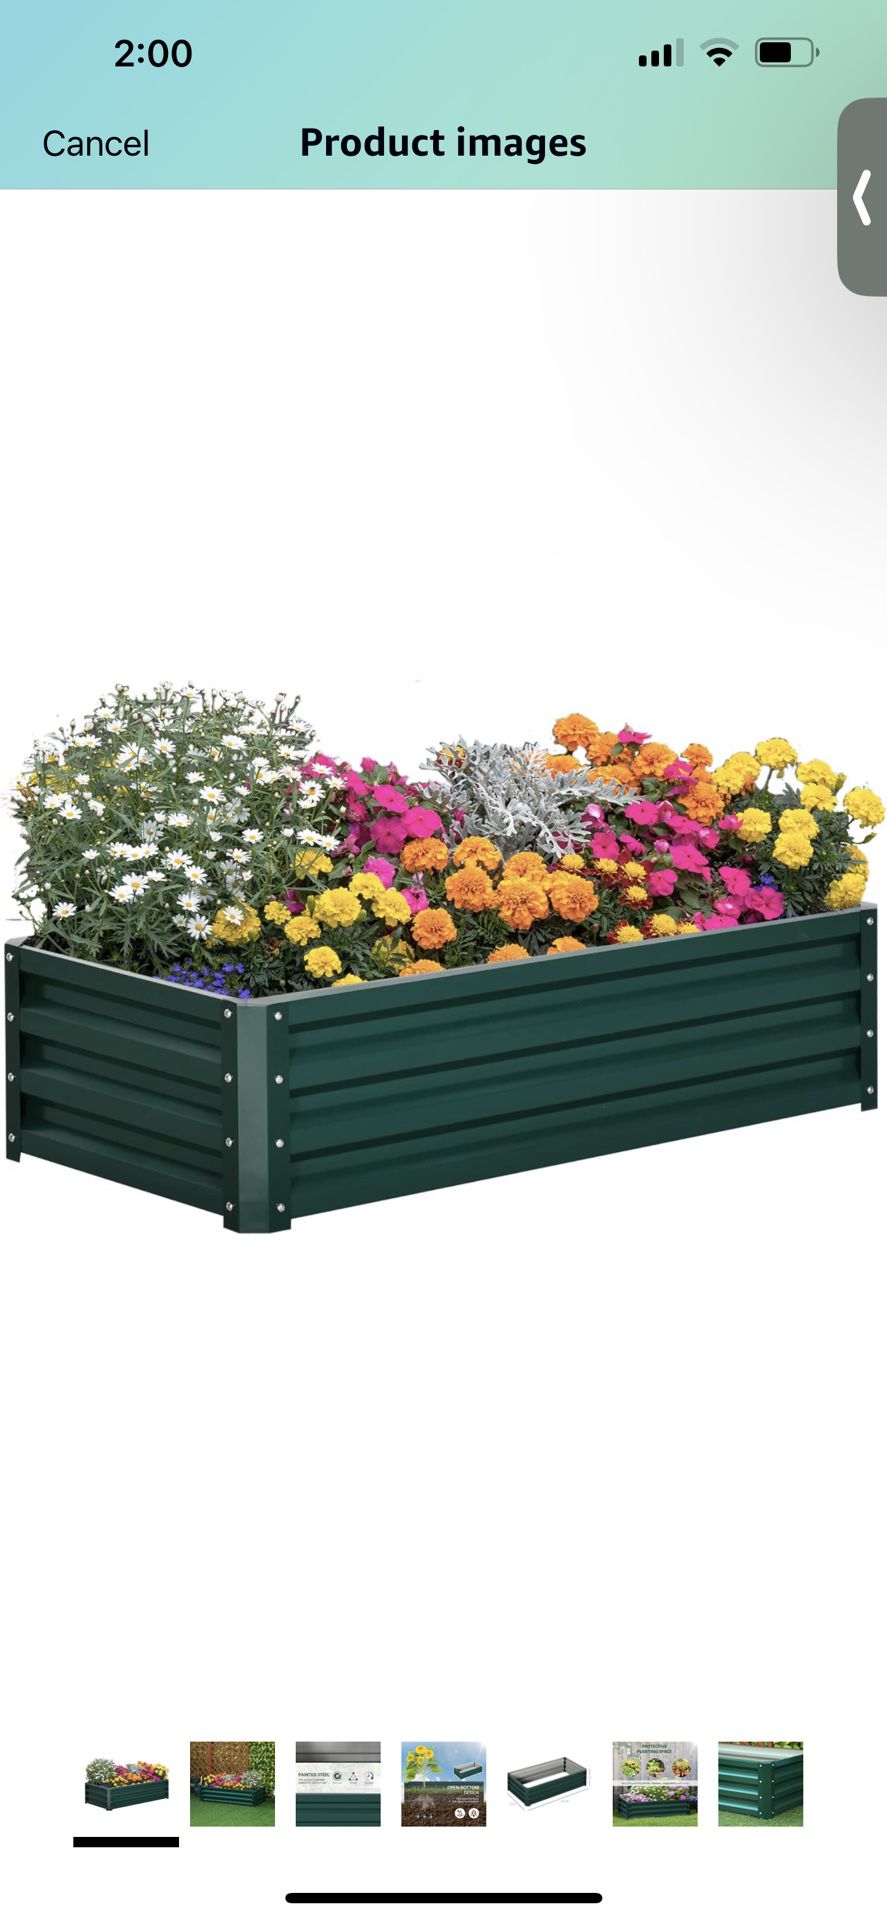 New in Box Galvanized Raised Garden Bed, 4' x 2' x 1' Metal Planter Box, for Growing Vegetables, Flowers, Herbs, Succulents, Green( 845-039v01gn)